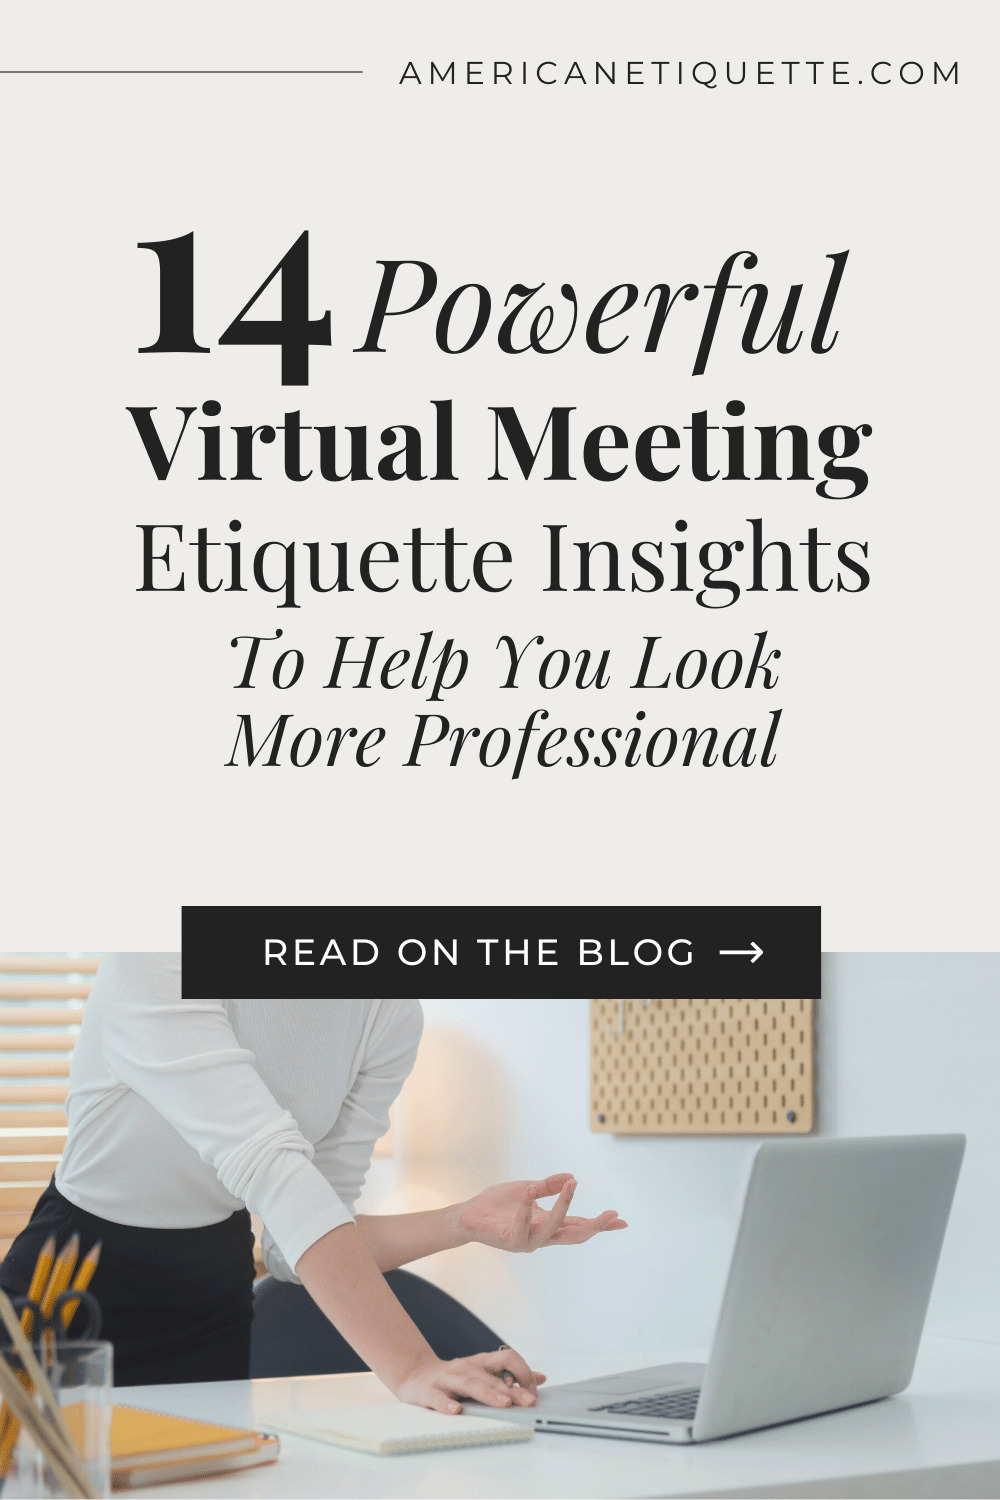 14 Powerful Virtual Meeting Etiquette Insights To Help You Look More Professional | American Etiquette